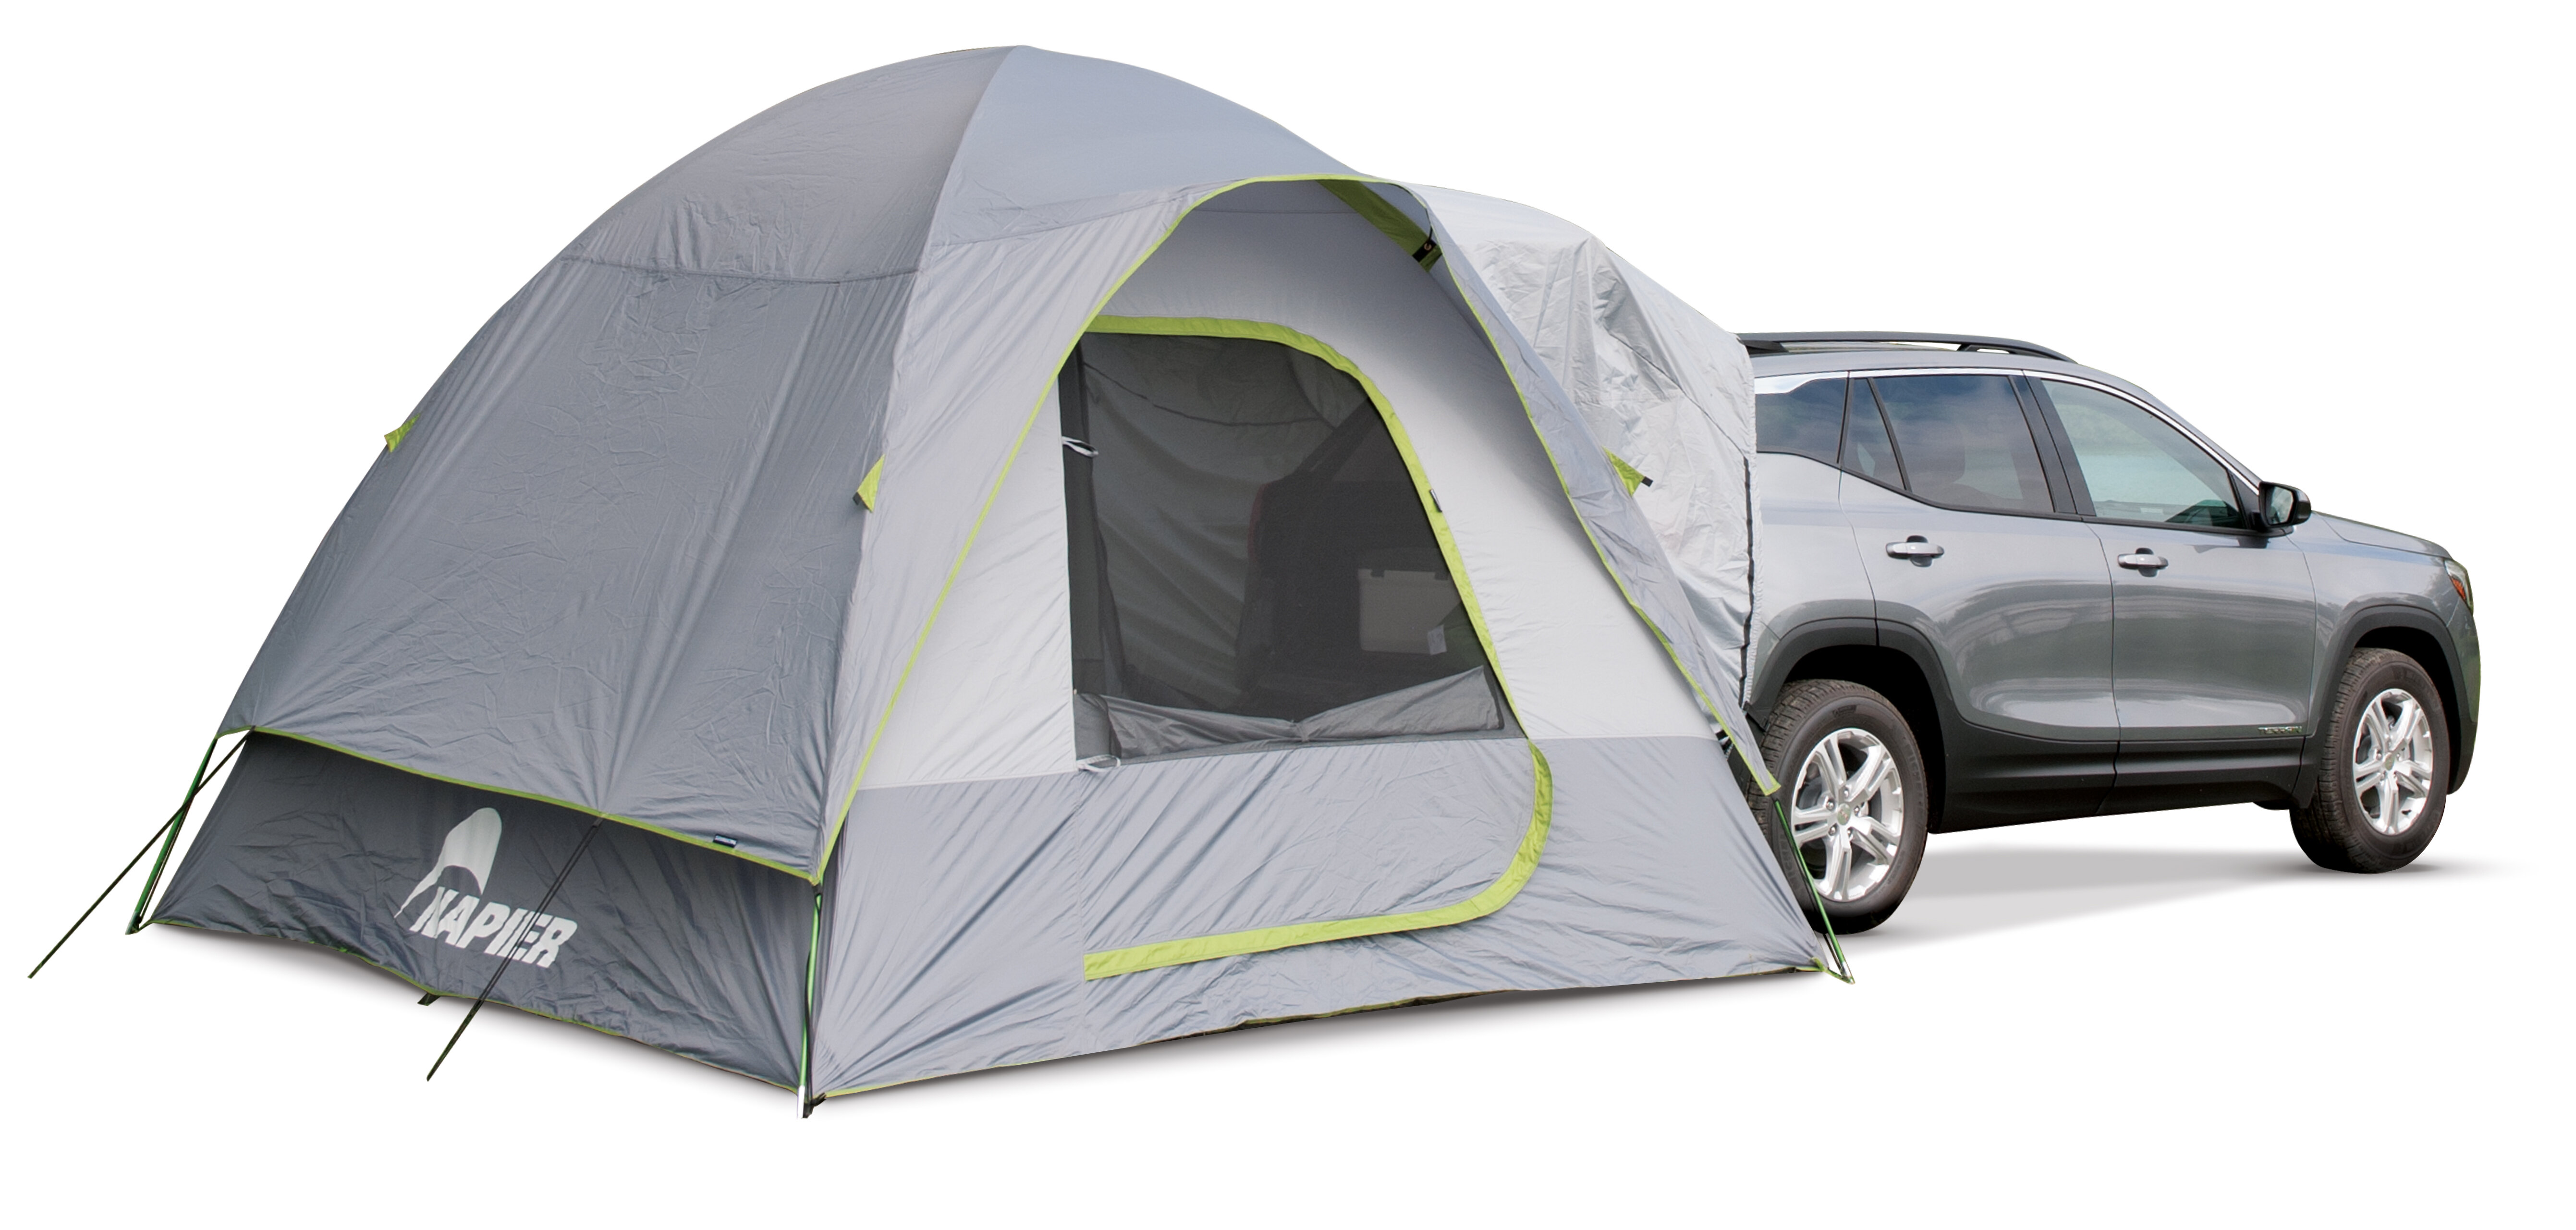 Coleman Camping Bundle Only $99.99 Shipped on Costco.com